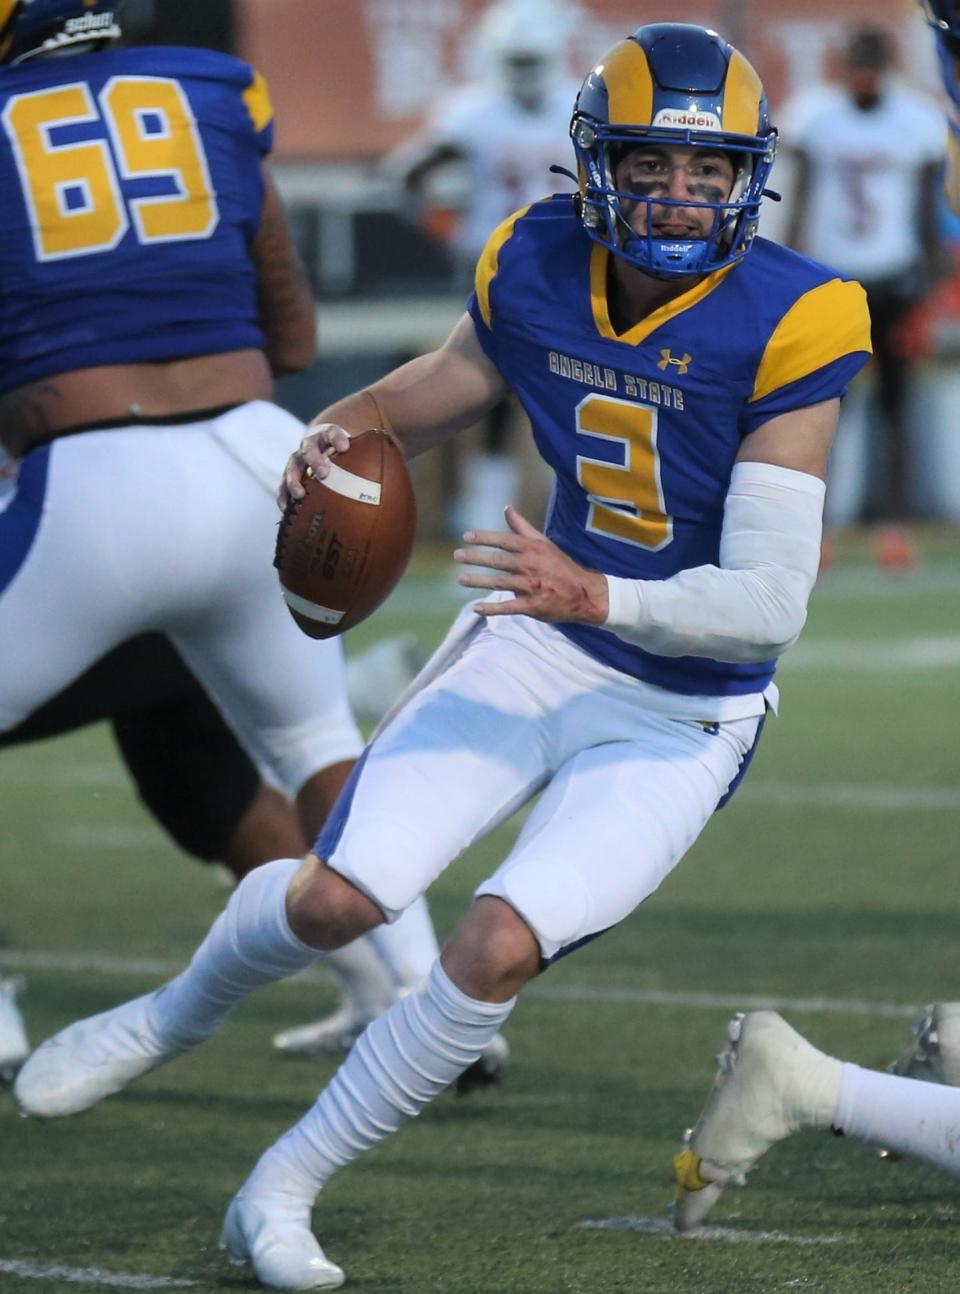 Angelo State University quarterback Zach Bronkhorst against UT Permian Basin in a homecoming contest at LeGrand Stadium at 1st Community Credit Union Field on Saturday, Oct. 16, 2021.